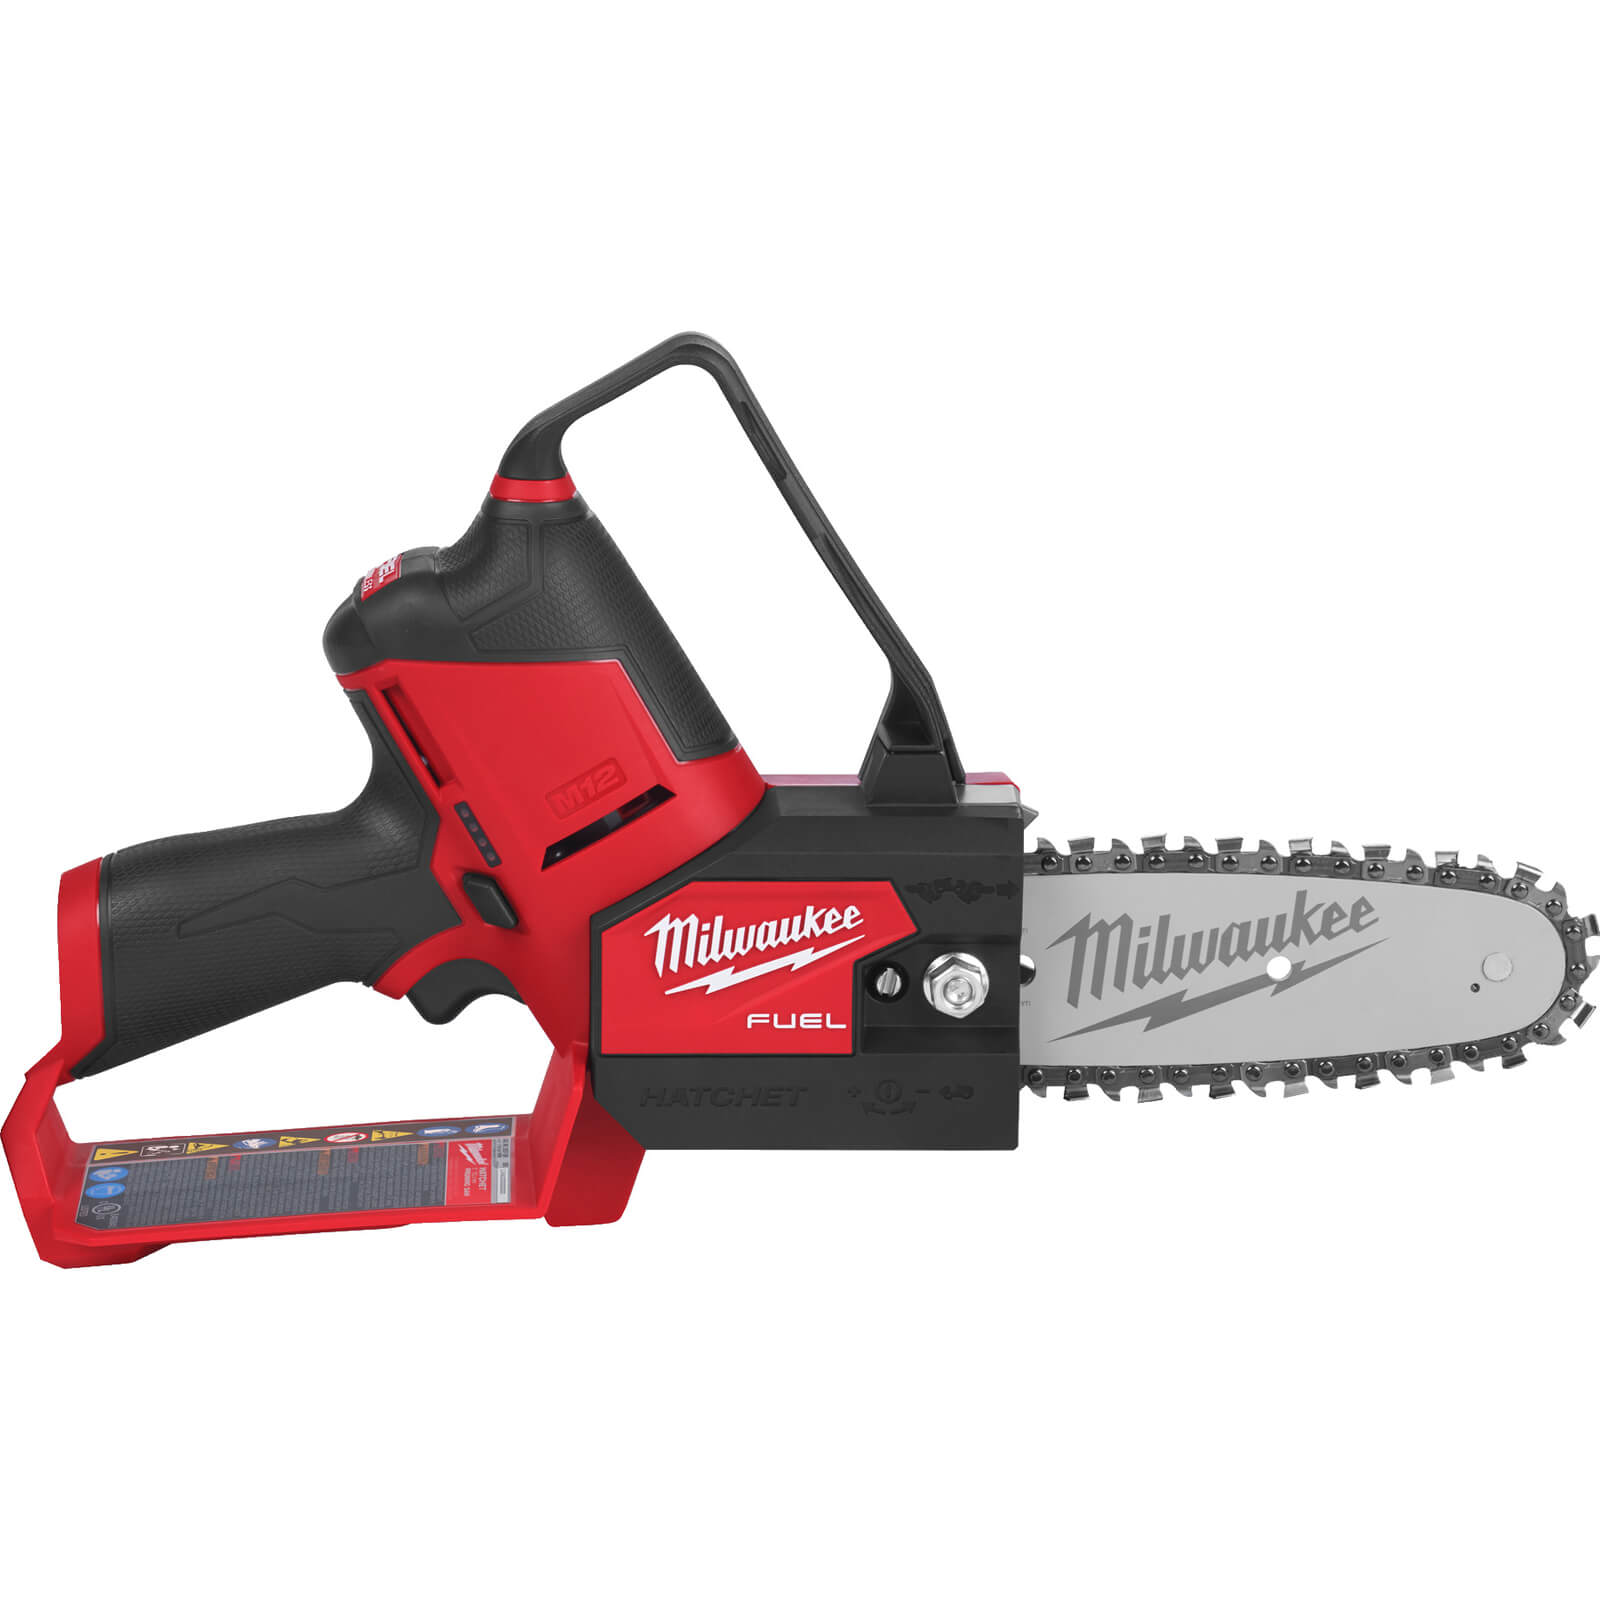 Image of Milwaukee M12 FHS Fuel 12v Cordless Brushless Hatchet Pruning Saw 150mm No Batteries No Charger No Case